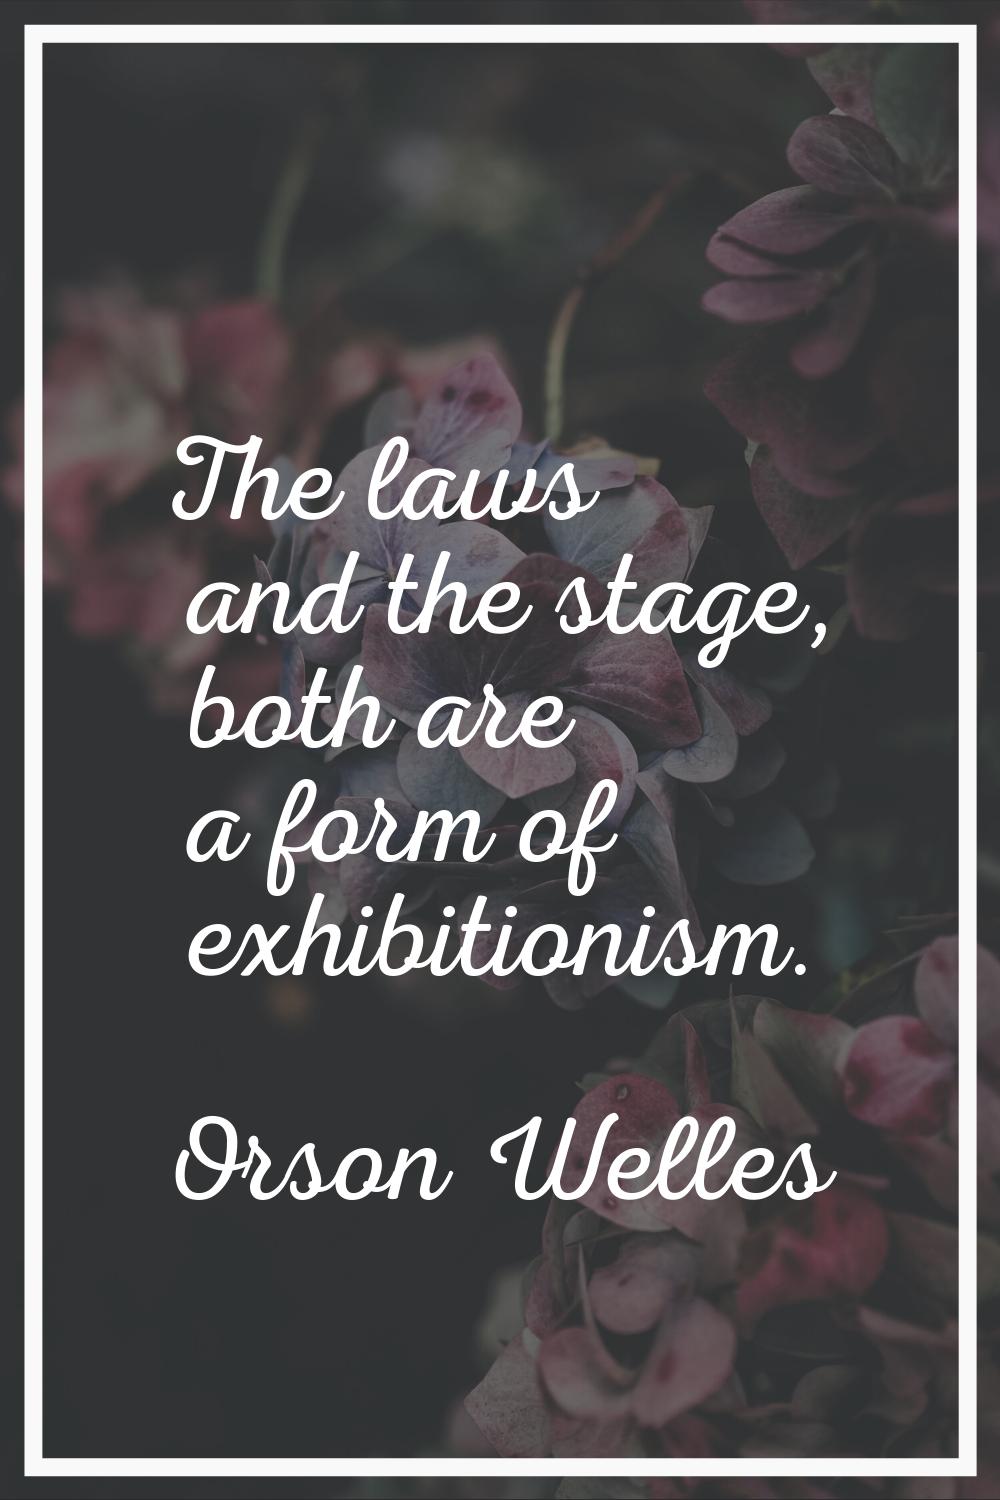 The laws and the stage, both are a form of exhibitionism.